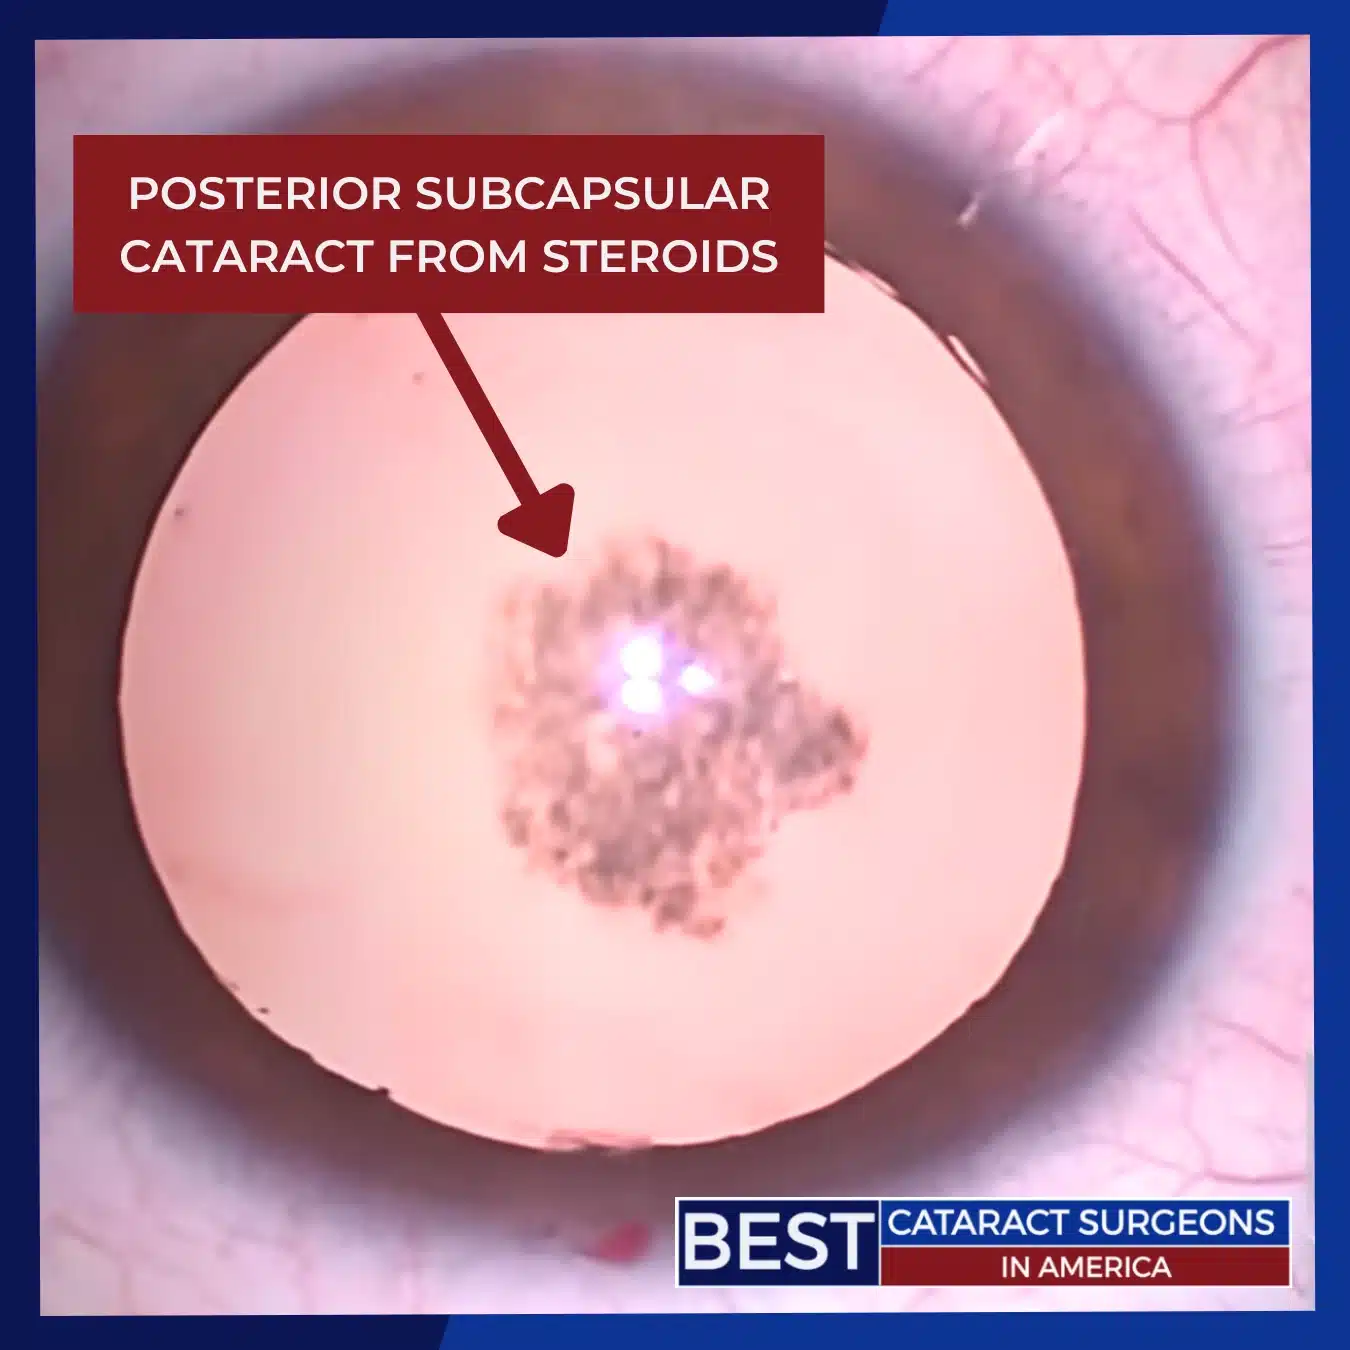 Posterior subcapsular cataract from steroids